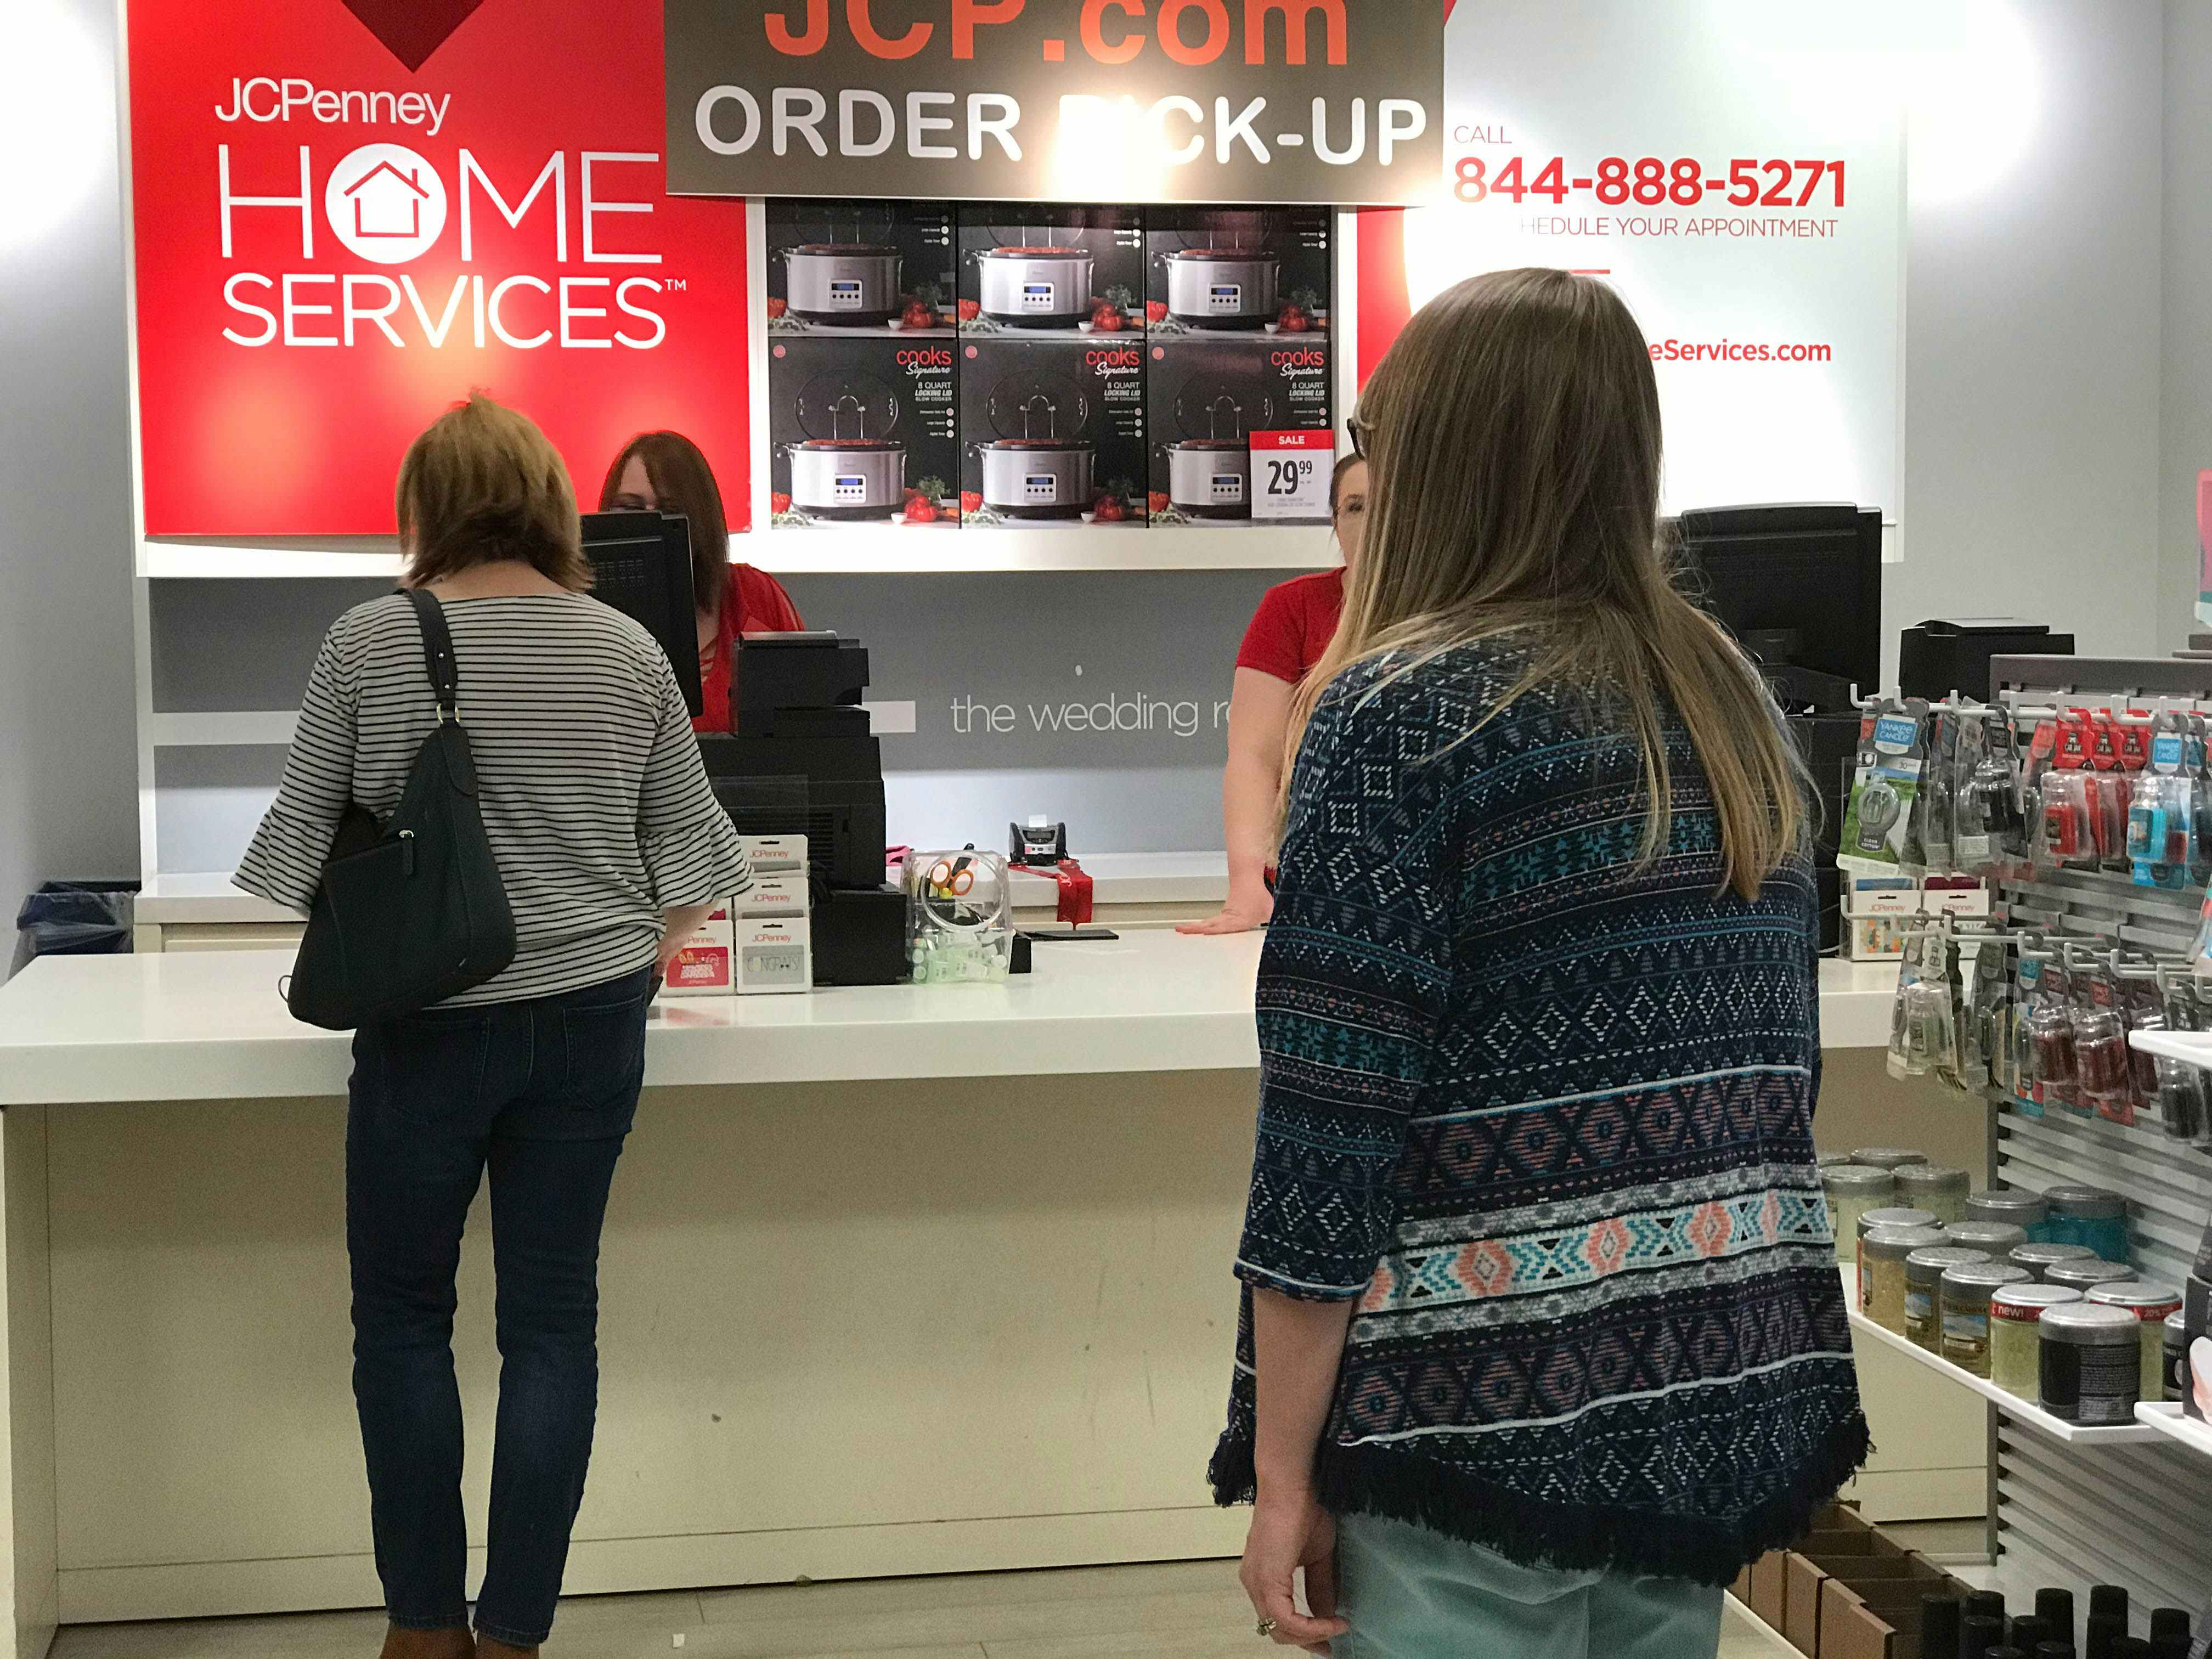 A woman standing in line for the JCPenney customer service desk.